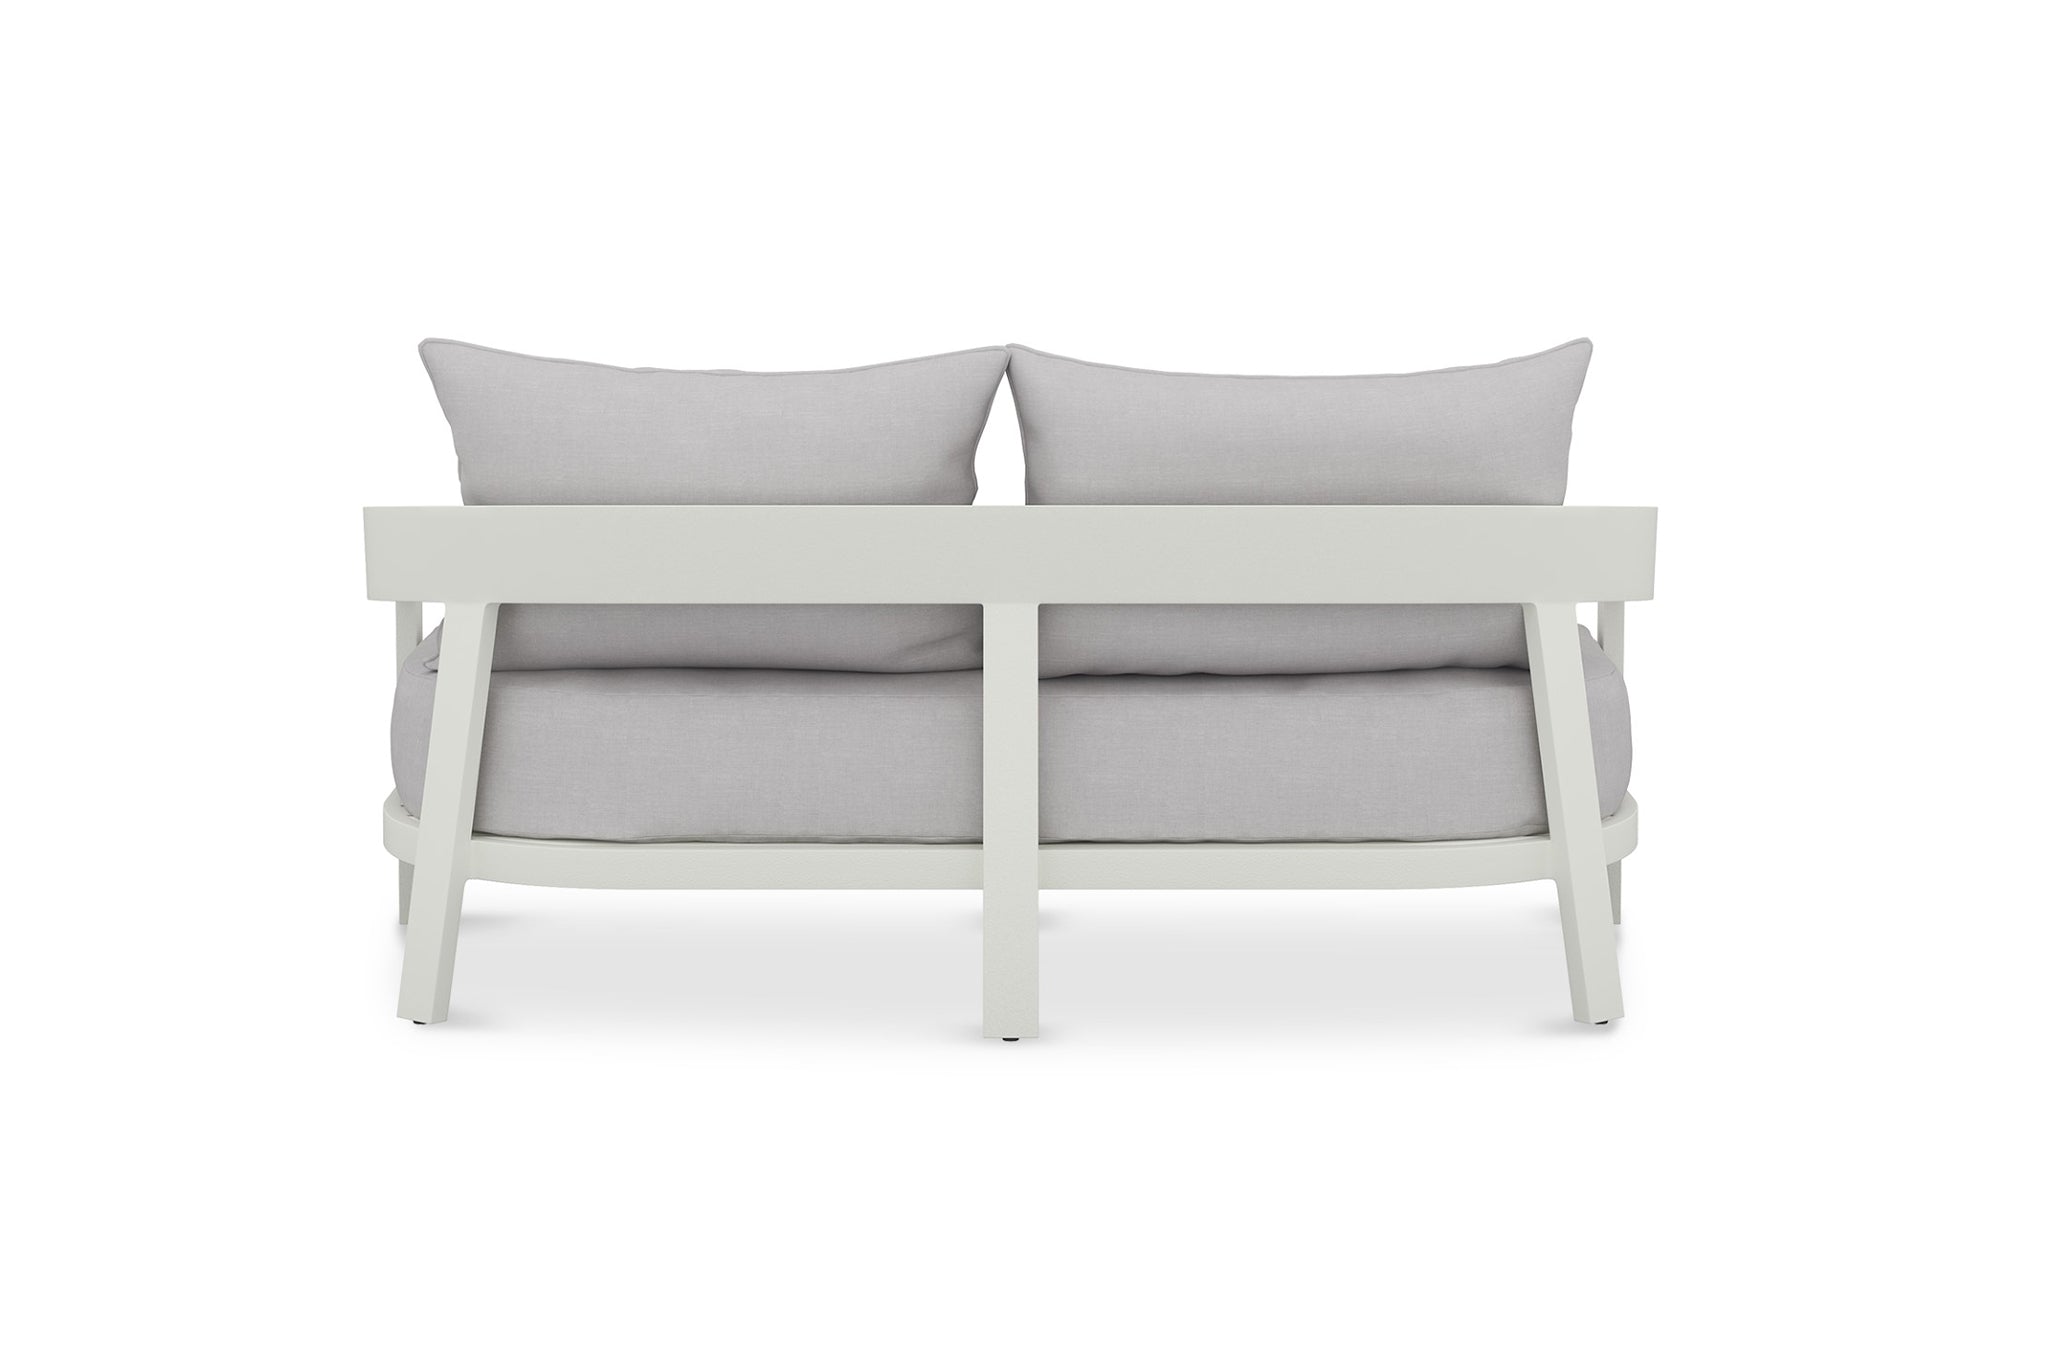 Queenscliff Outdoor Sofa – 2 Seater – White Powder Coated Frame